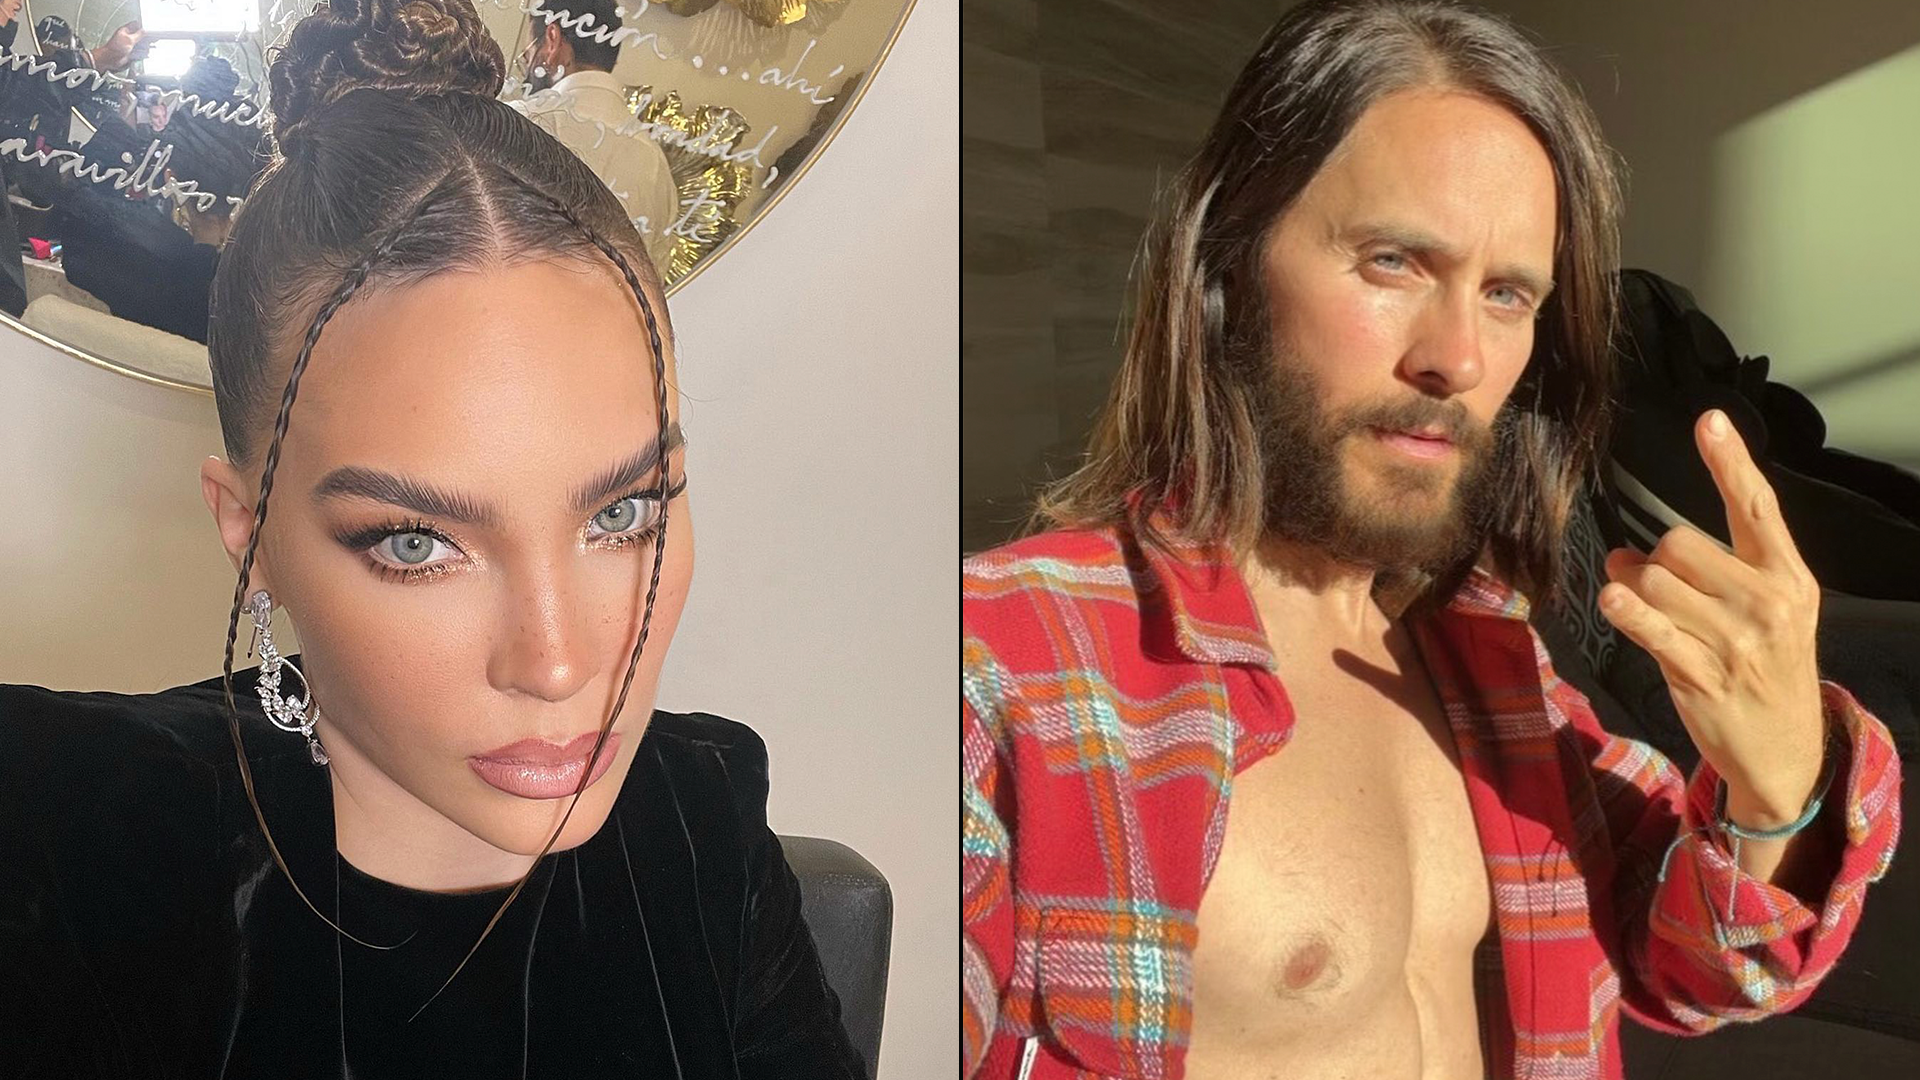 What Belinda said after Jared Leto was willing to get tattooed in her honor  - Infobae